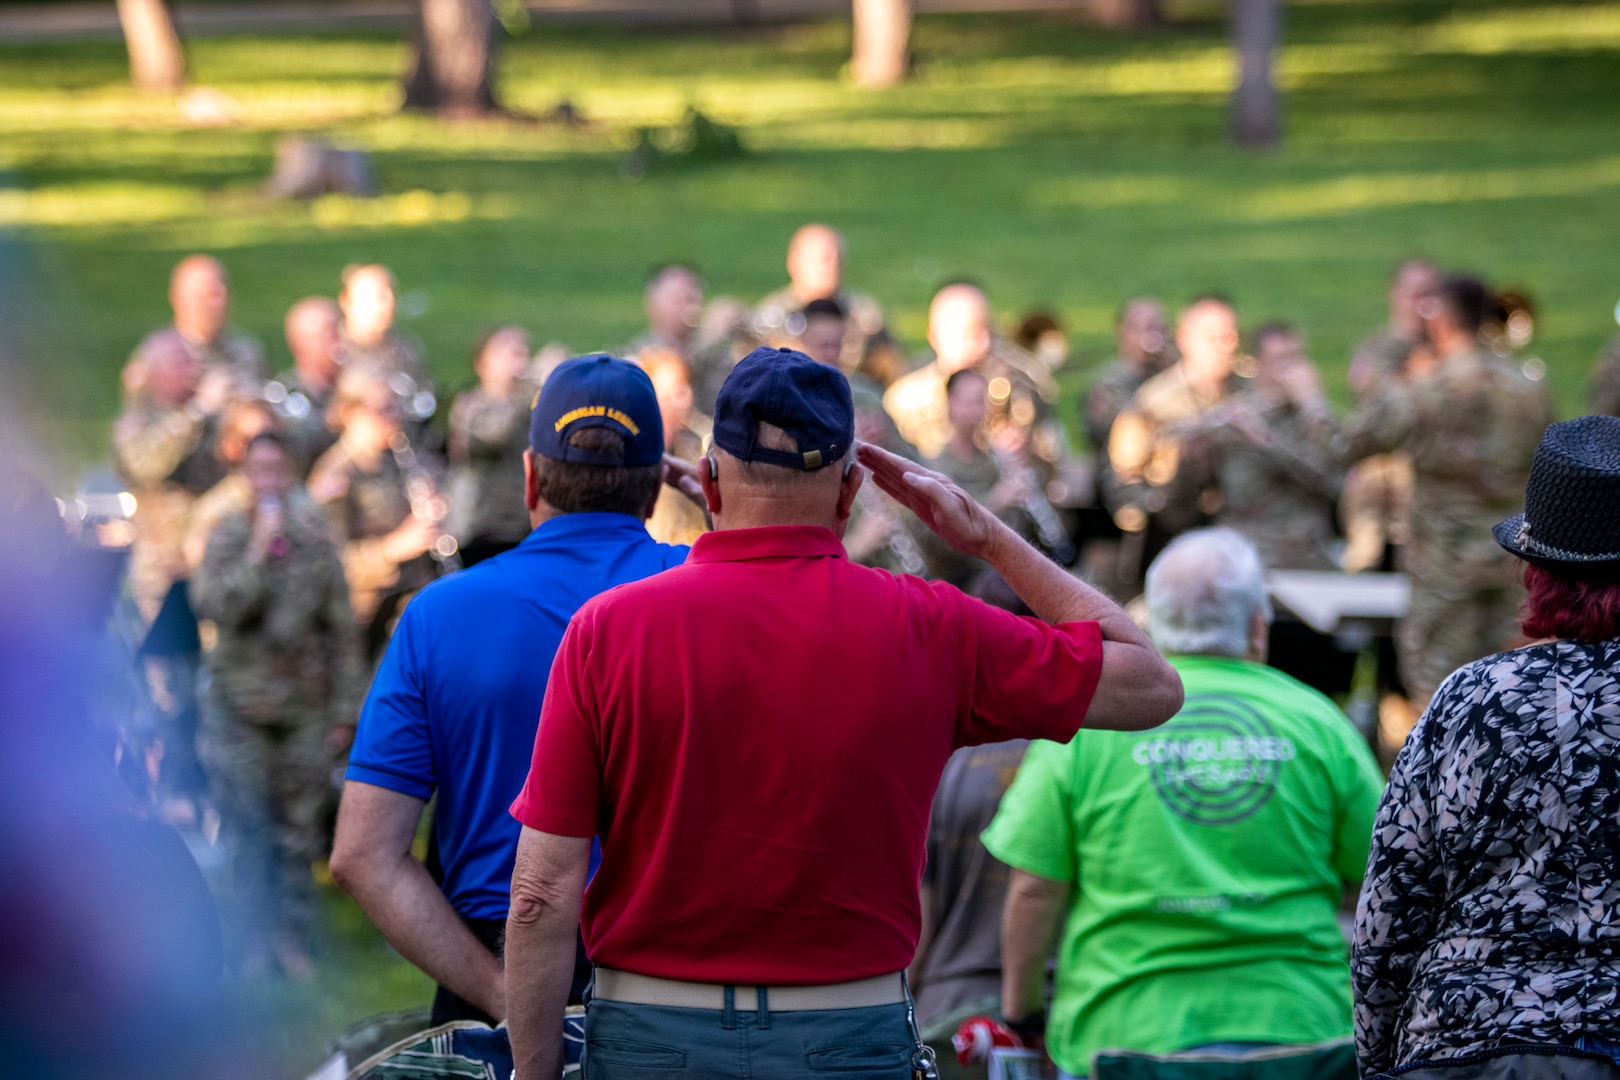 Veterans salute during the National Anthem performed by the Nebraska Army National Guard's 43rd Army Band as they celebrate 75 years of service with an anniversary concert, June 3, 2023, at the Wildewood Park in Ralston, Nebraska.